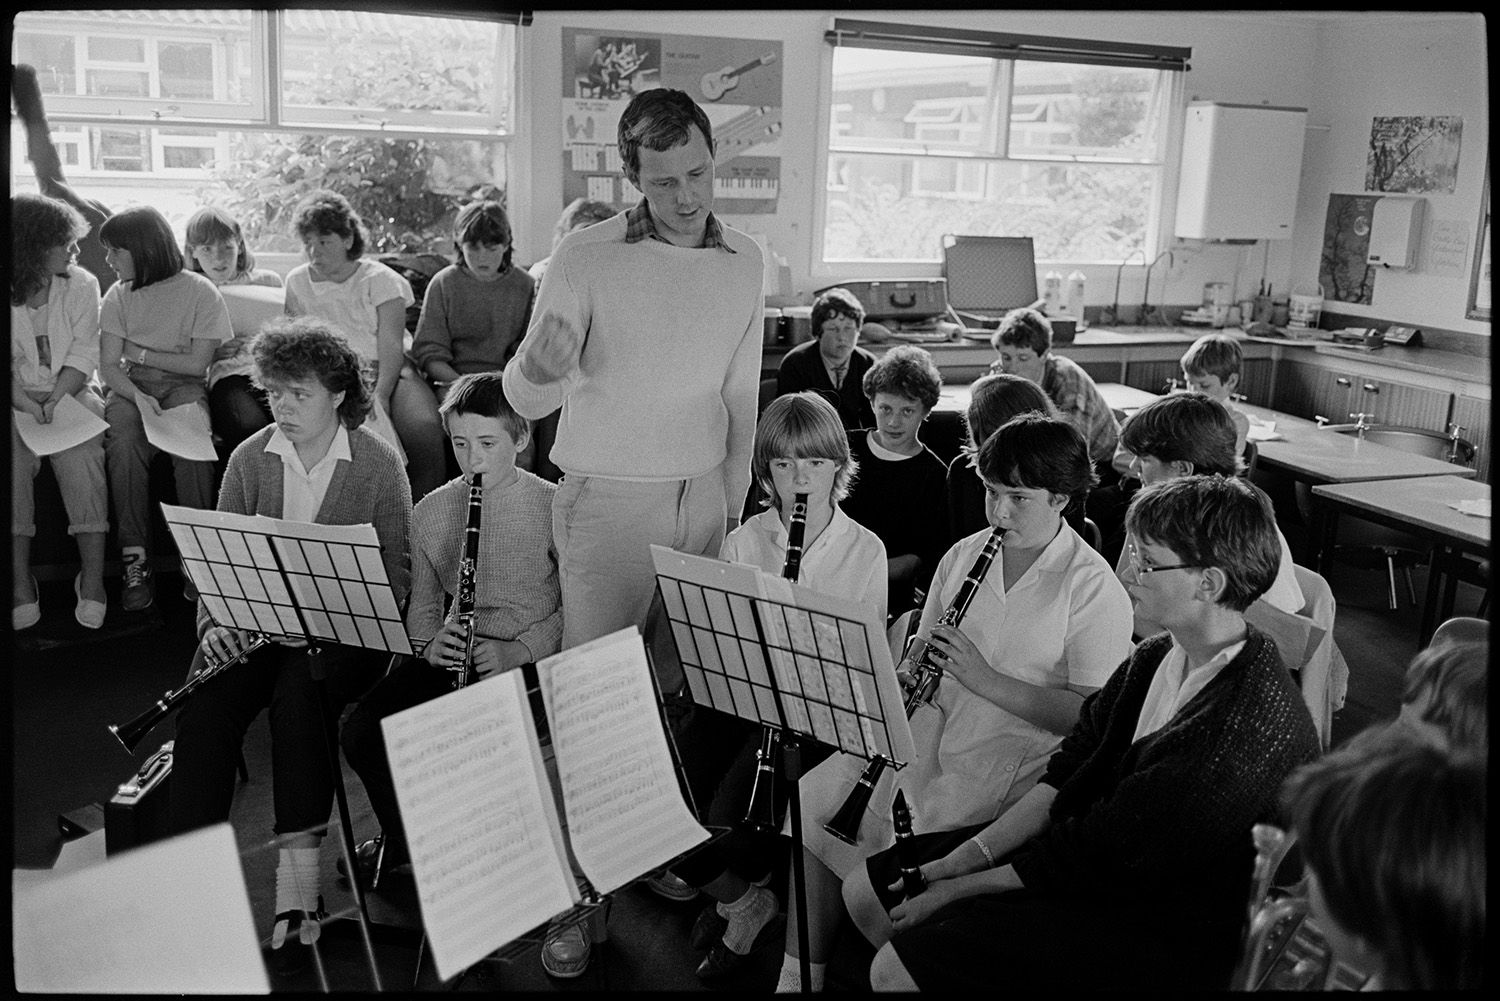 Music class in school, visiting teacher with staff and pupils playing music and advising. 
[Chris Williams teaching a music lesson in Holsworthy School. He is teaching a group of children playing clarinets. More children are sat in the background, possibly singing with the school orchestra.]